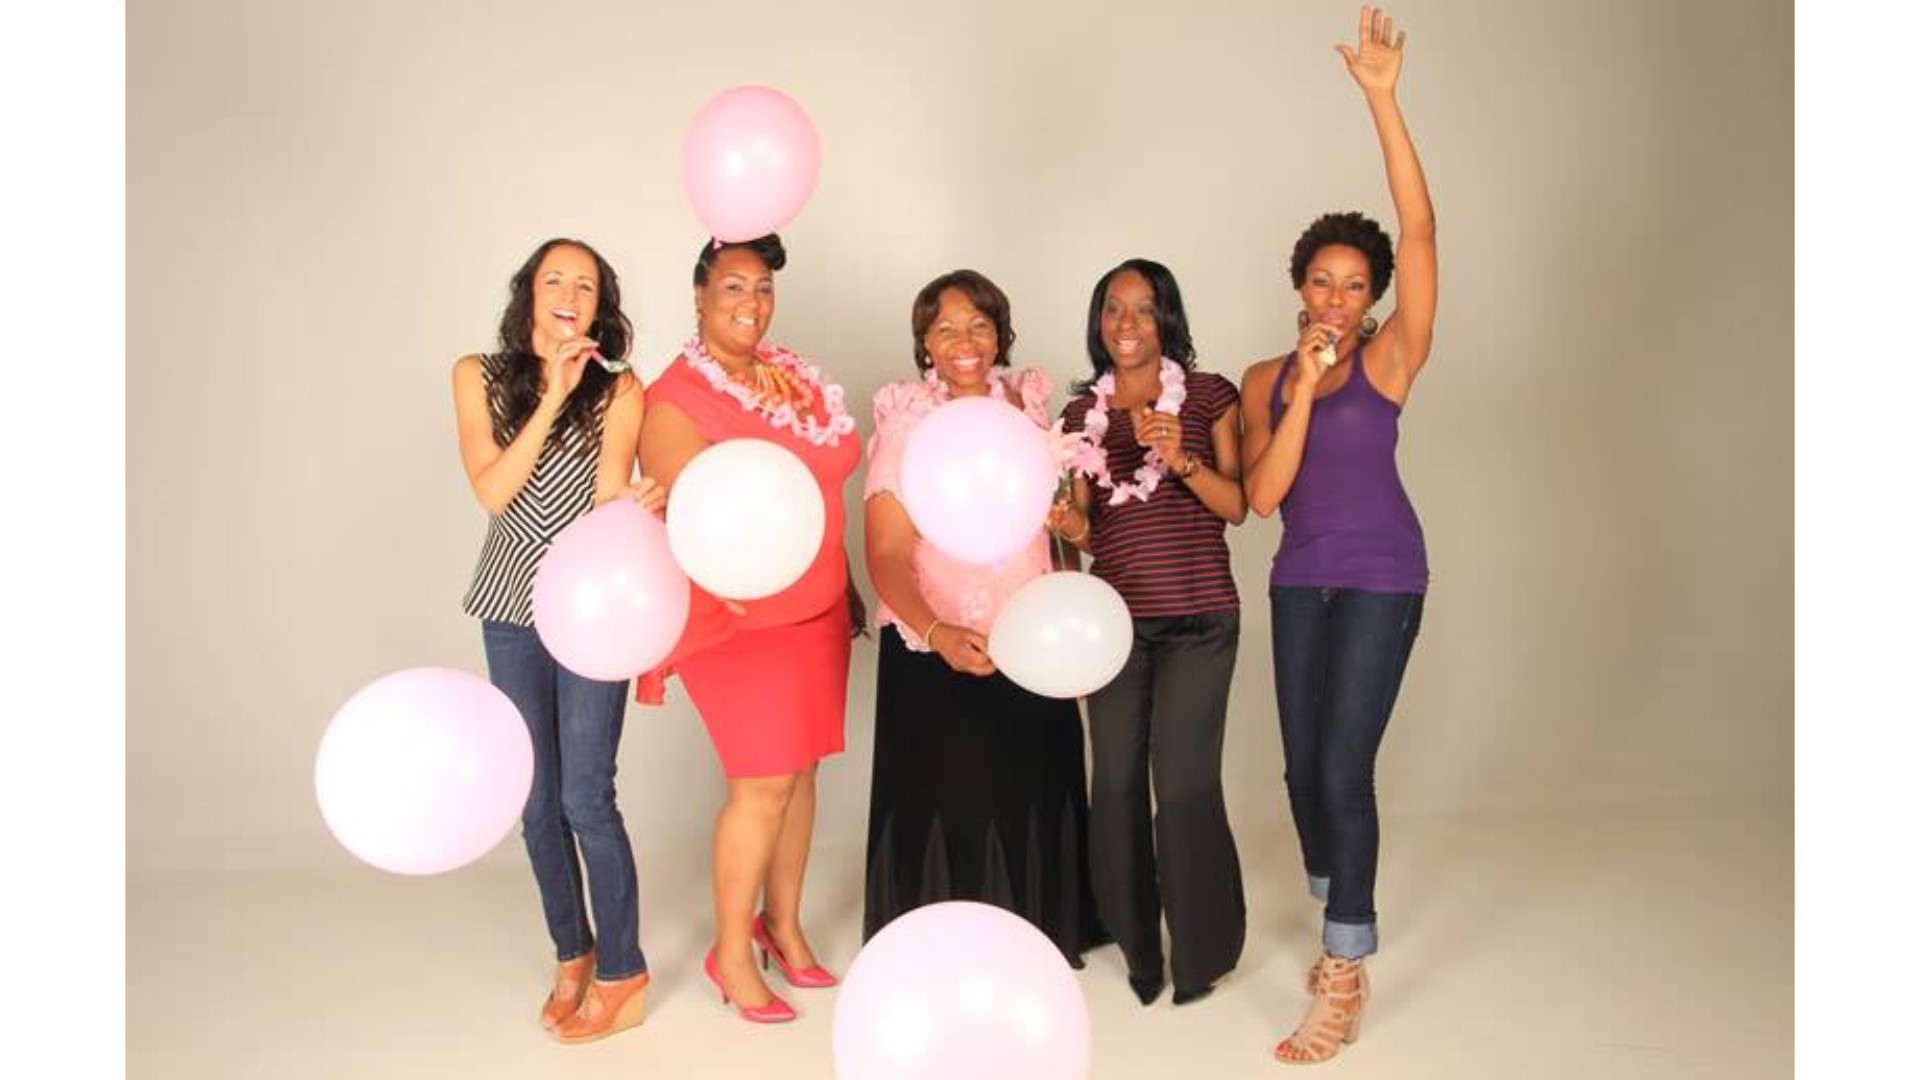 Breast Cancer Survivors Celebrated in Photo Series